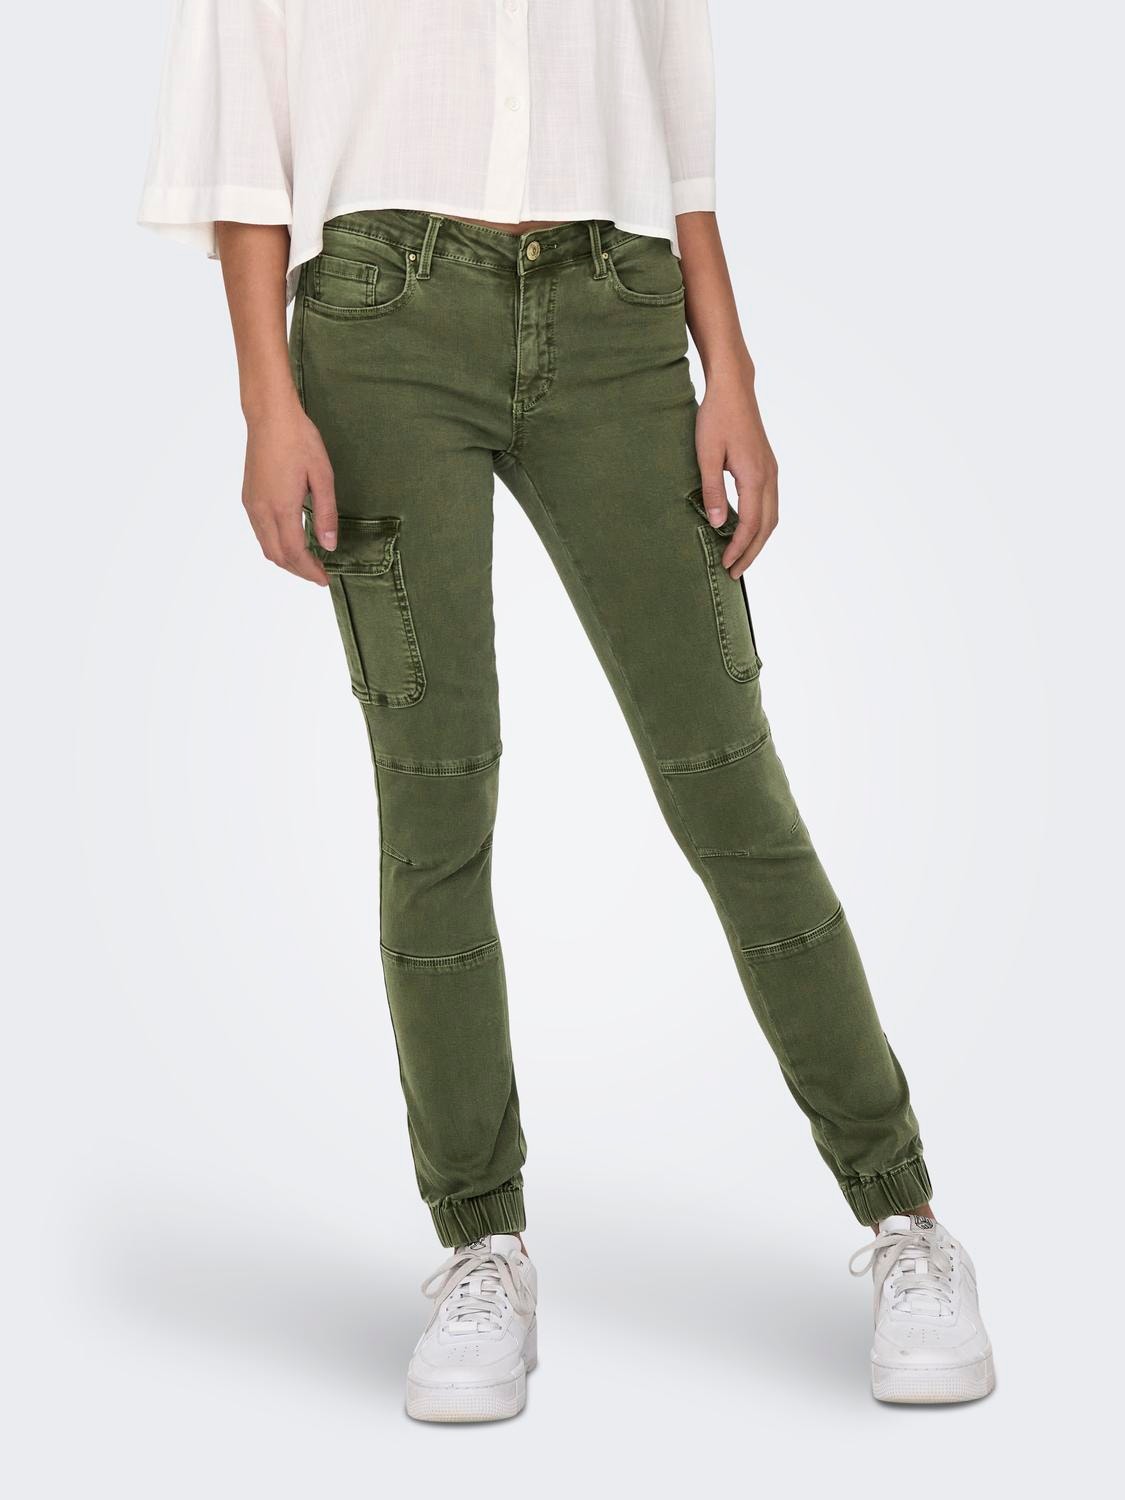 ONLY Cargo trousers with mid waist -Kalamata - 15170889